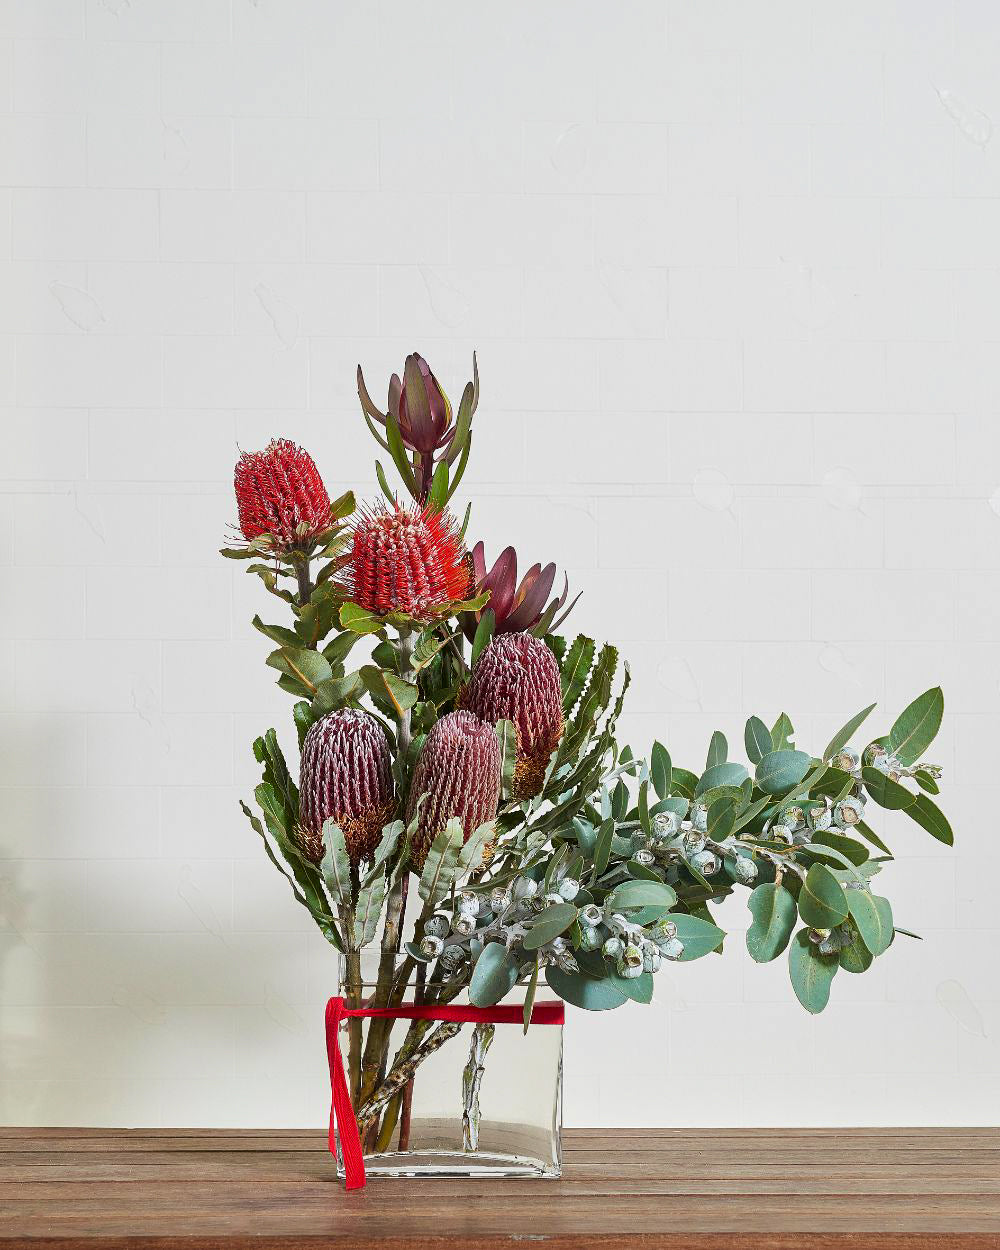 Textured vase arrangement overflowing with varied eucalyptus foliage, featuring decorative gum nuts.